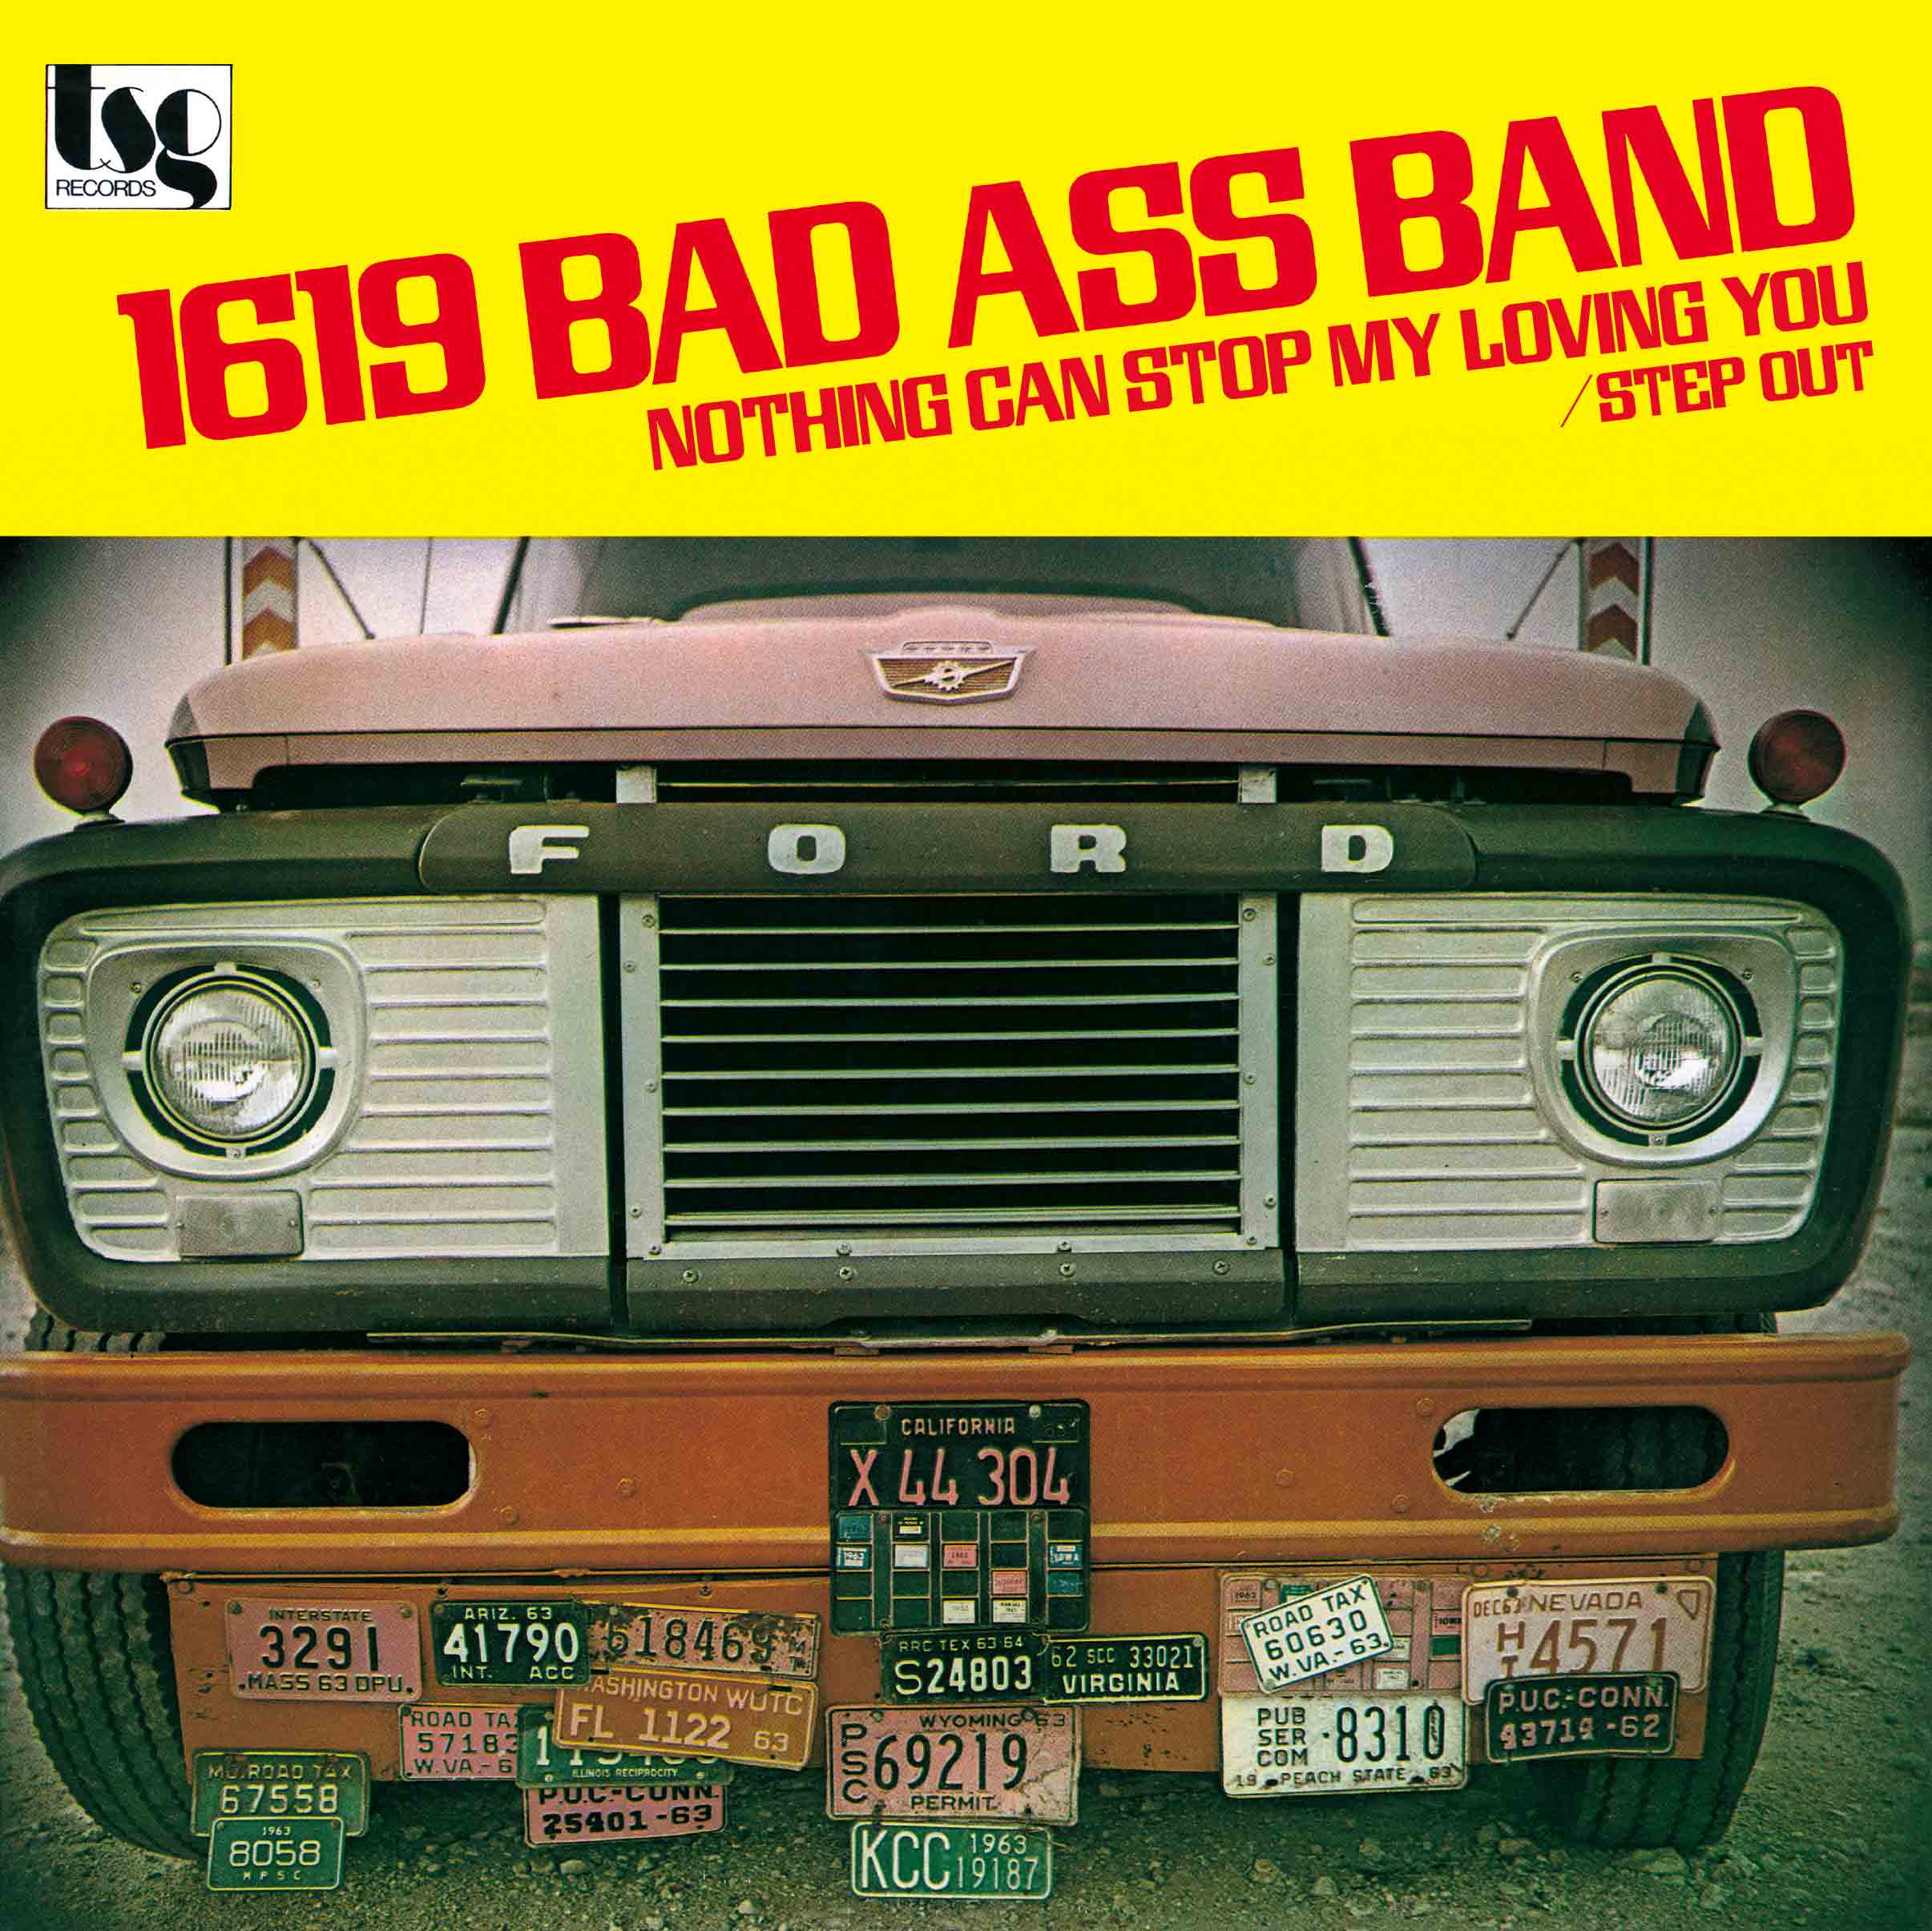 1619 BAD ASS BAND「Nothing Can Stop My Loving You / Step Out」